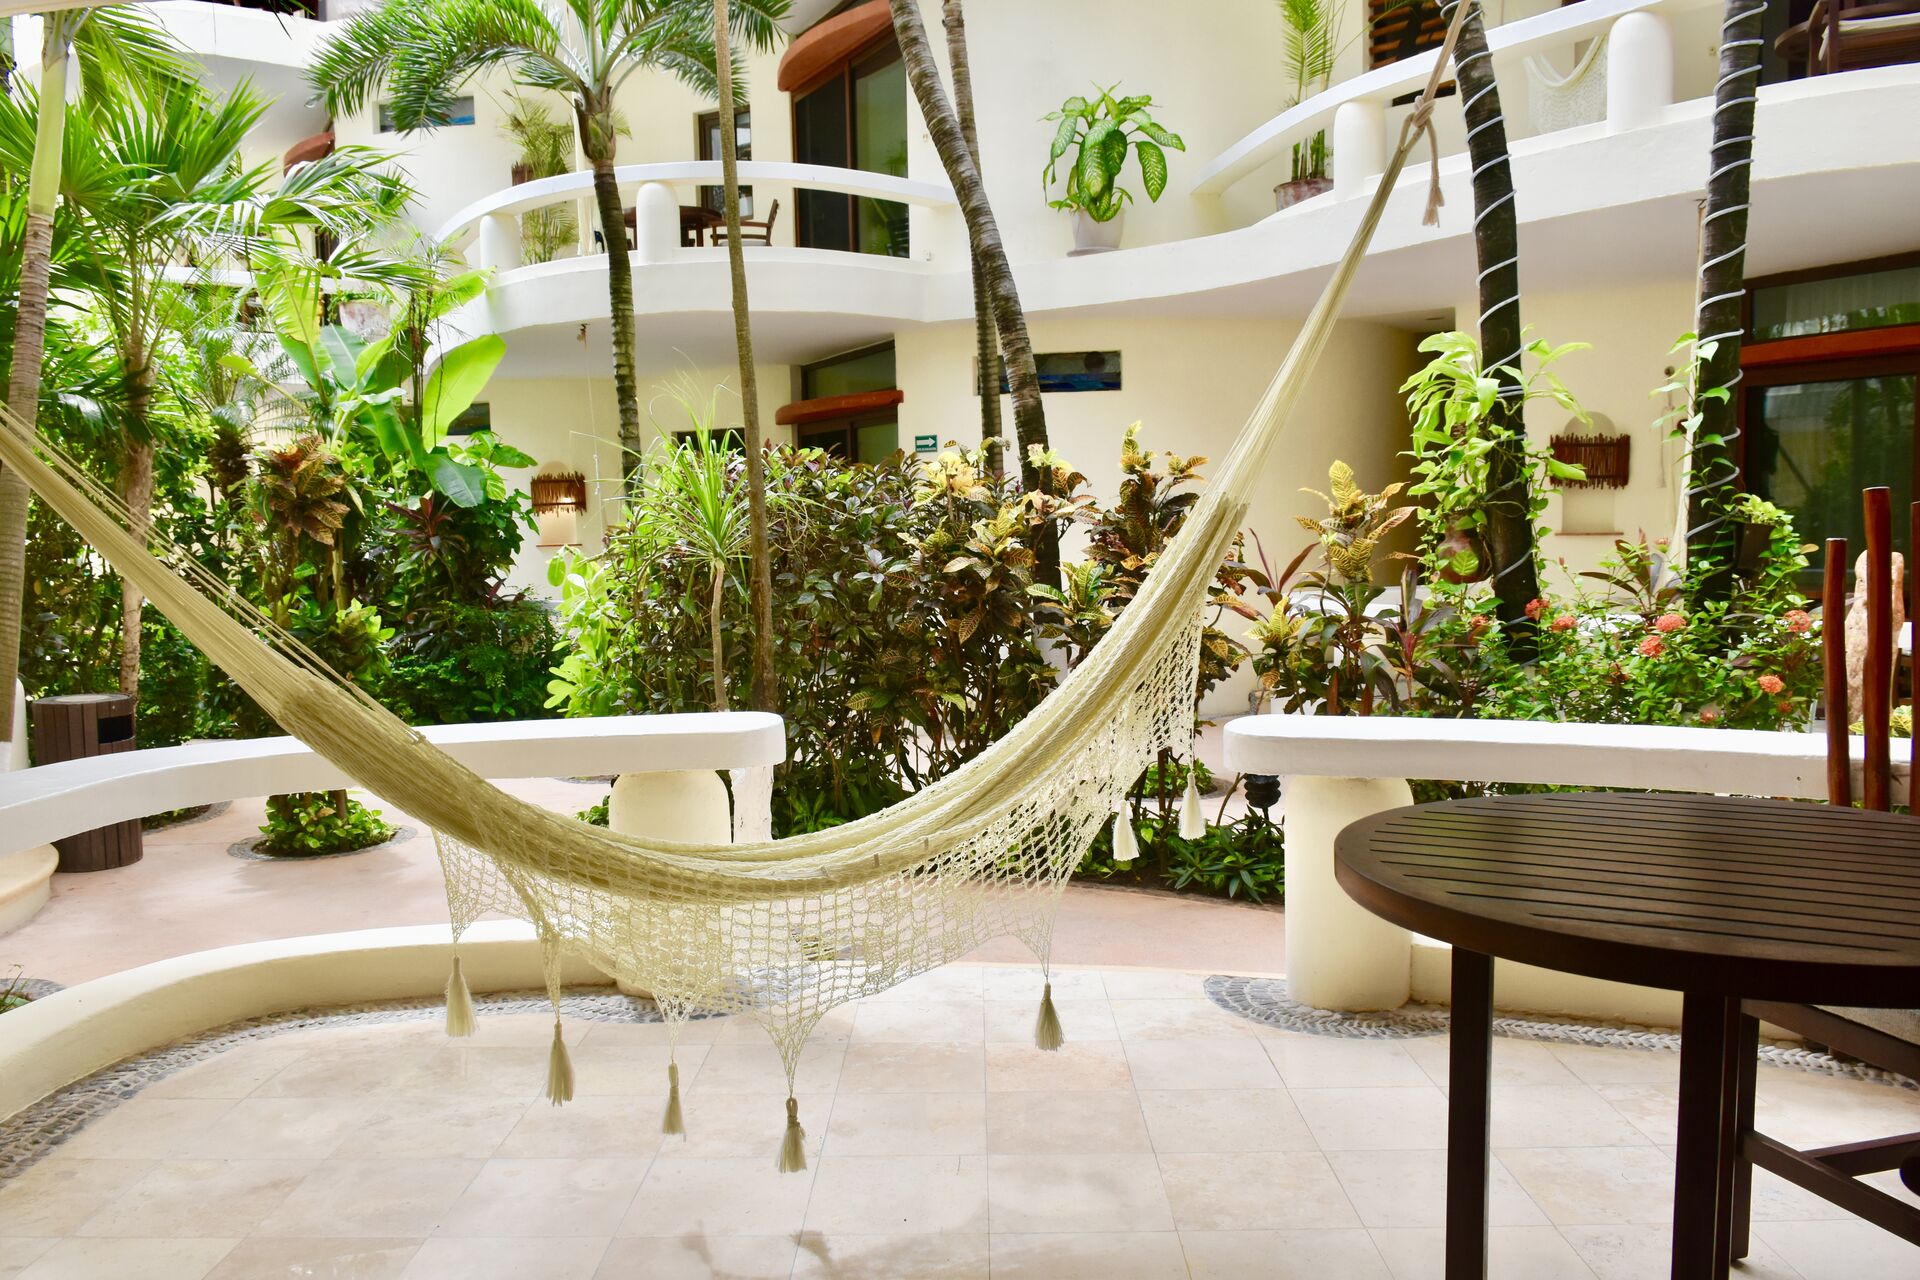 Large balcony with chairs and hammock.